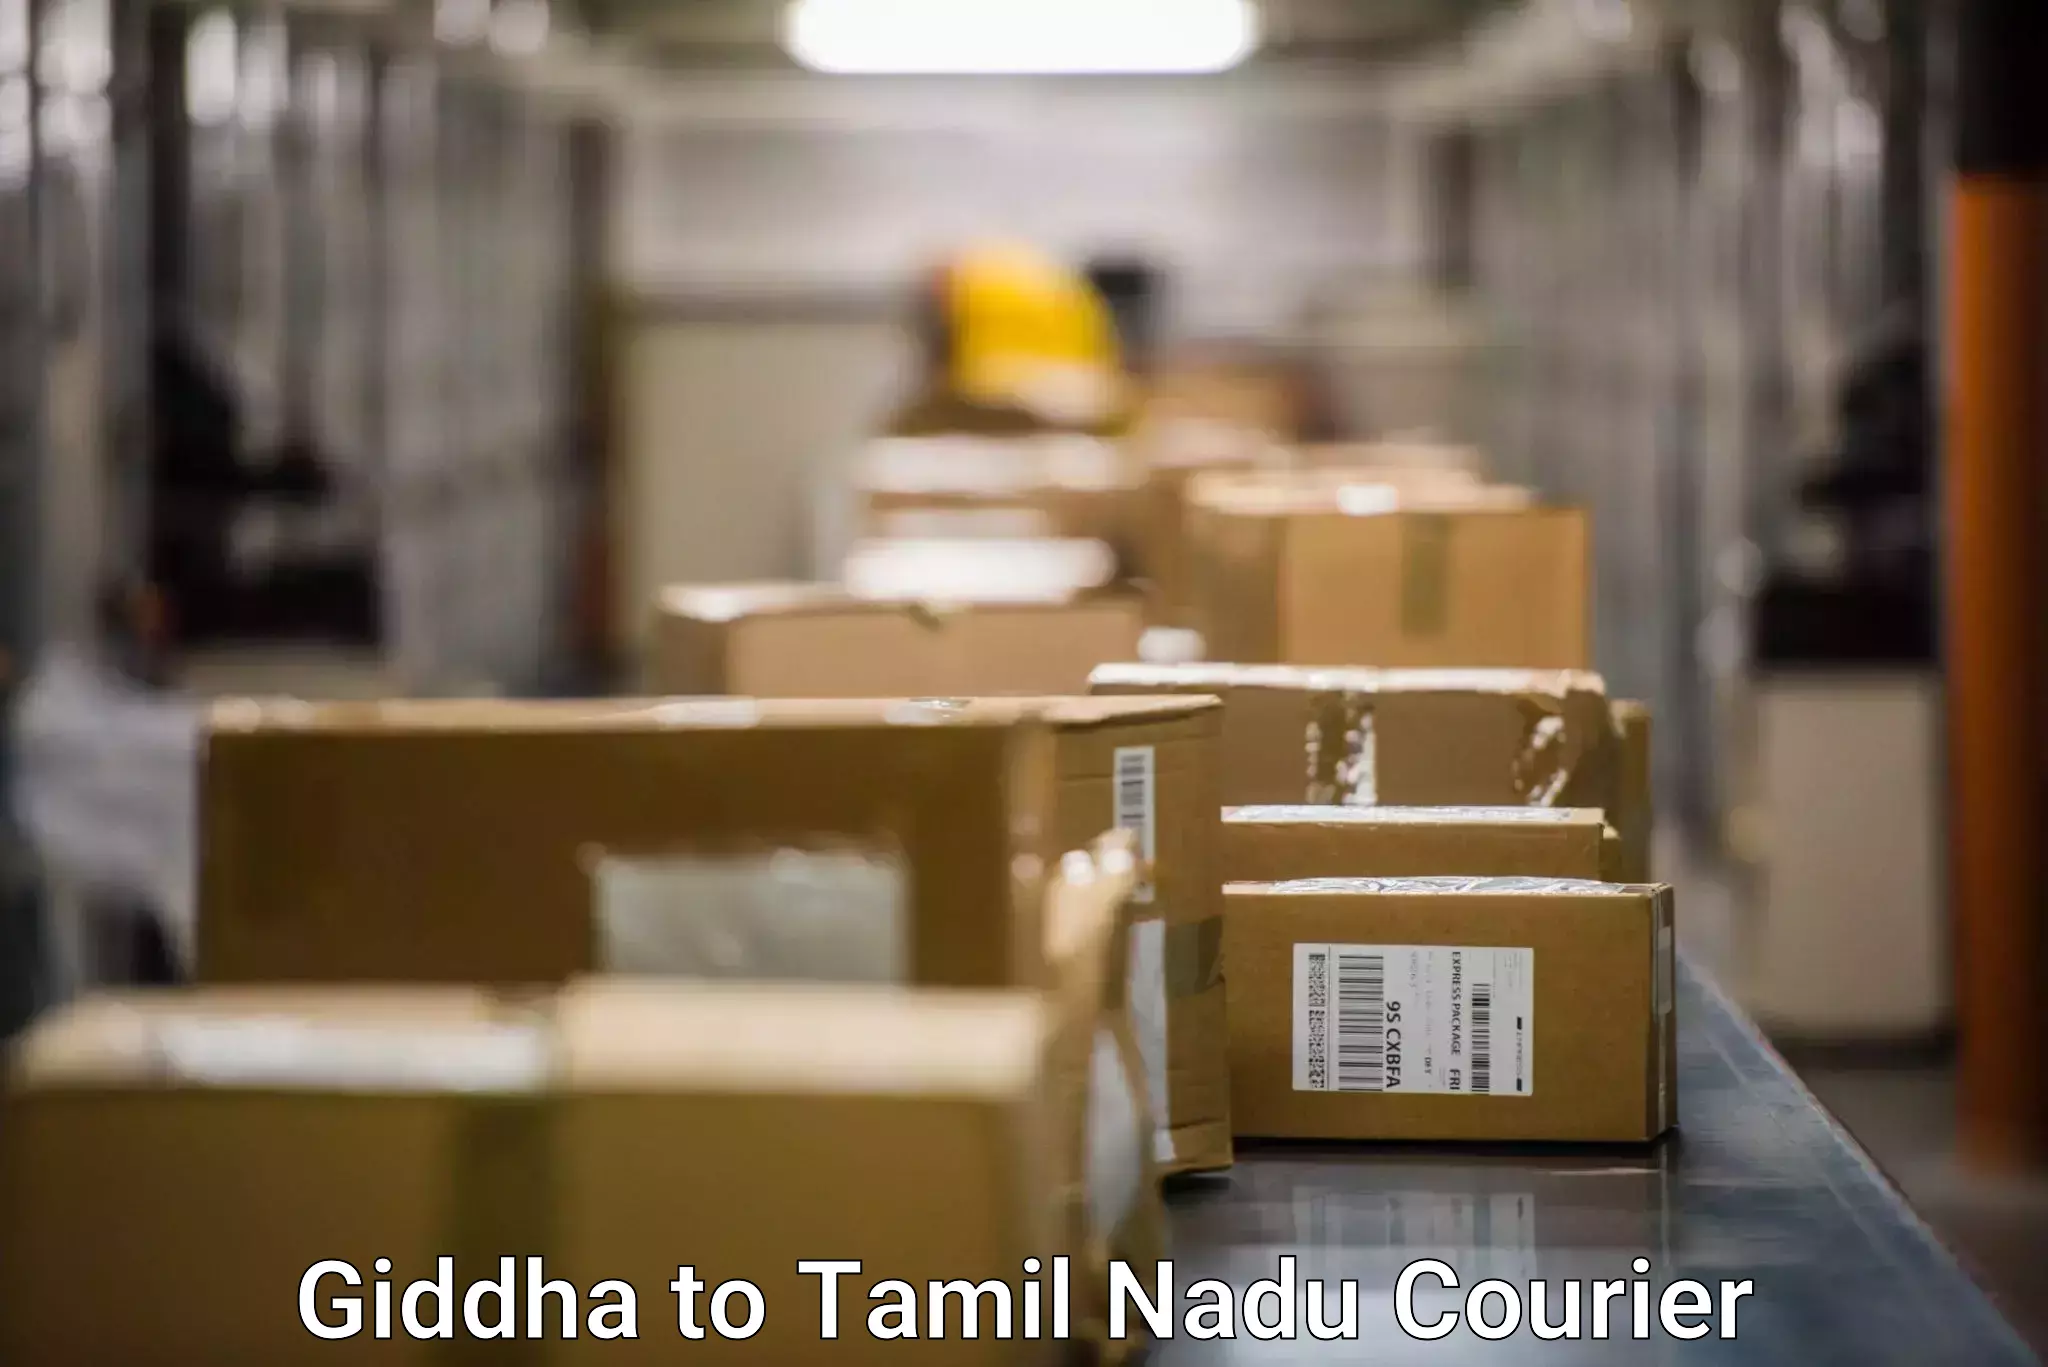 Express delivery capabilities in Giddha to Vickramasingapuram